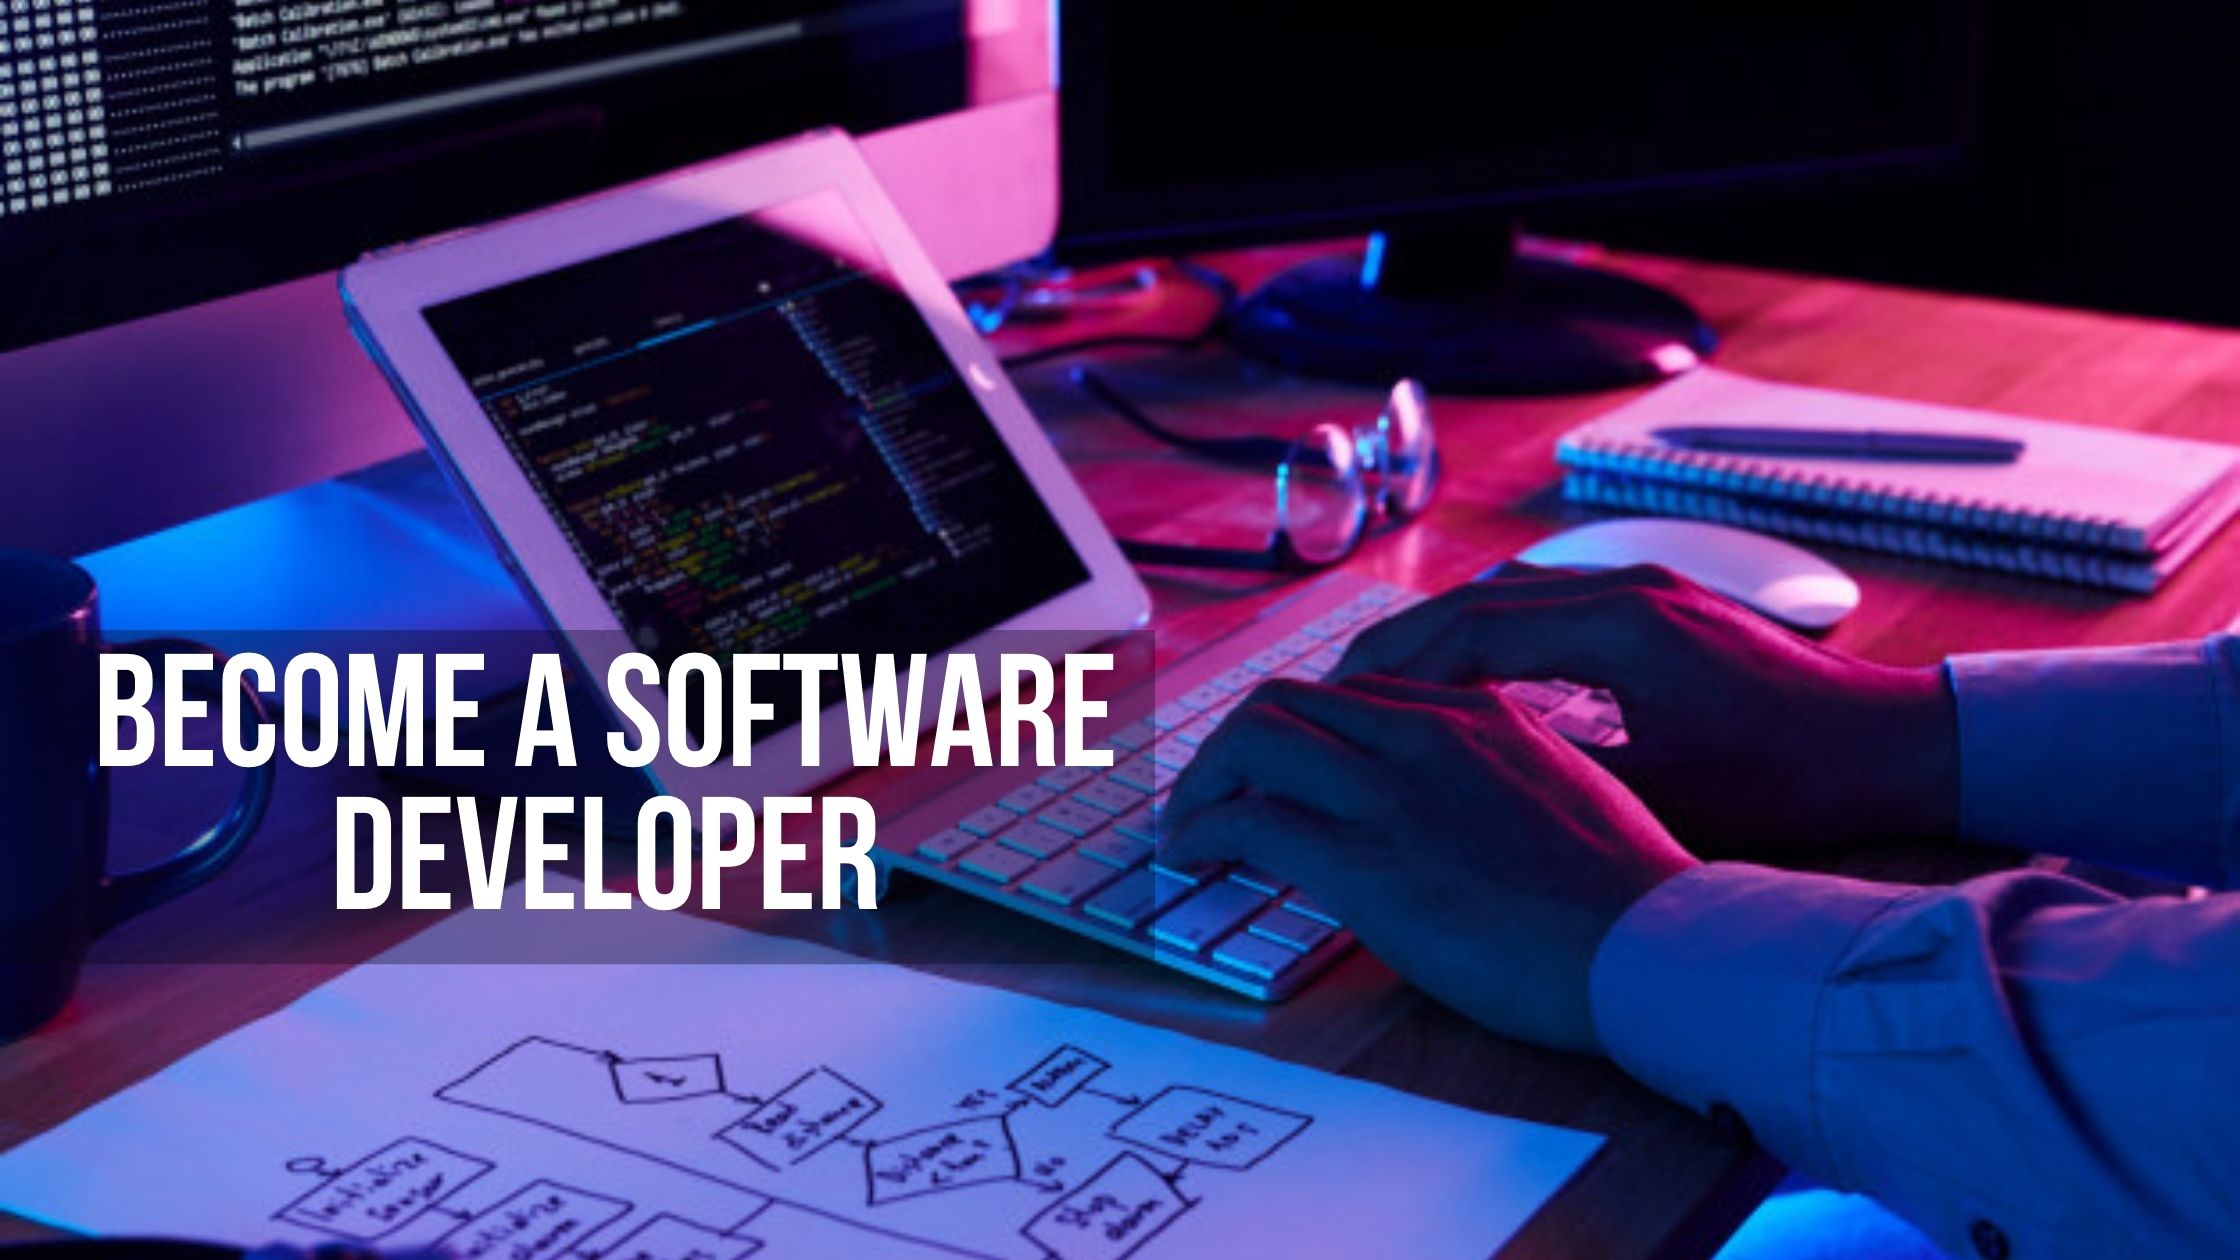 15 Good Reasons To Become A Software Developer